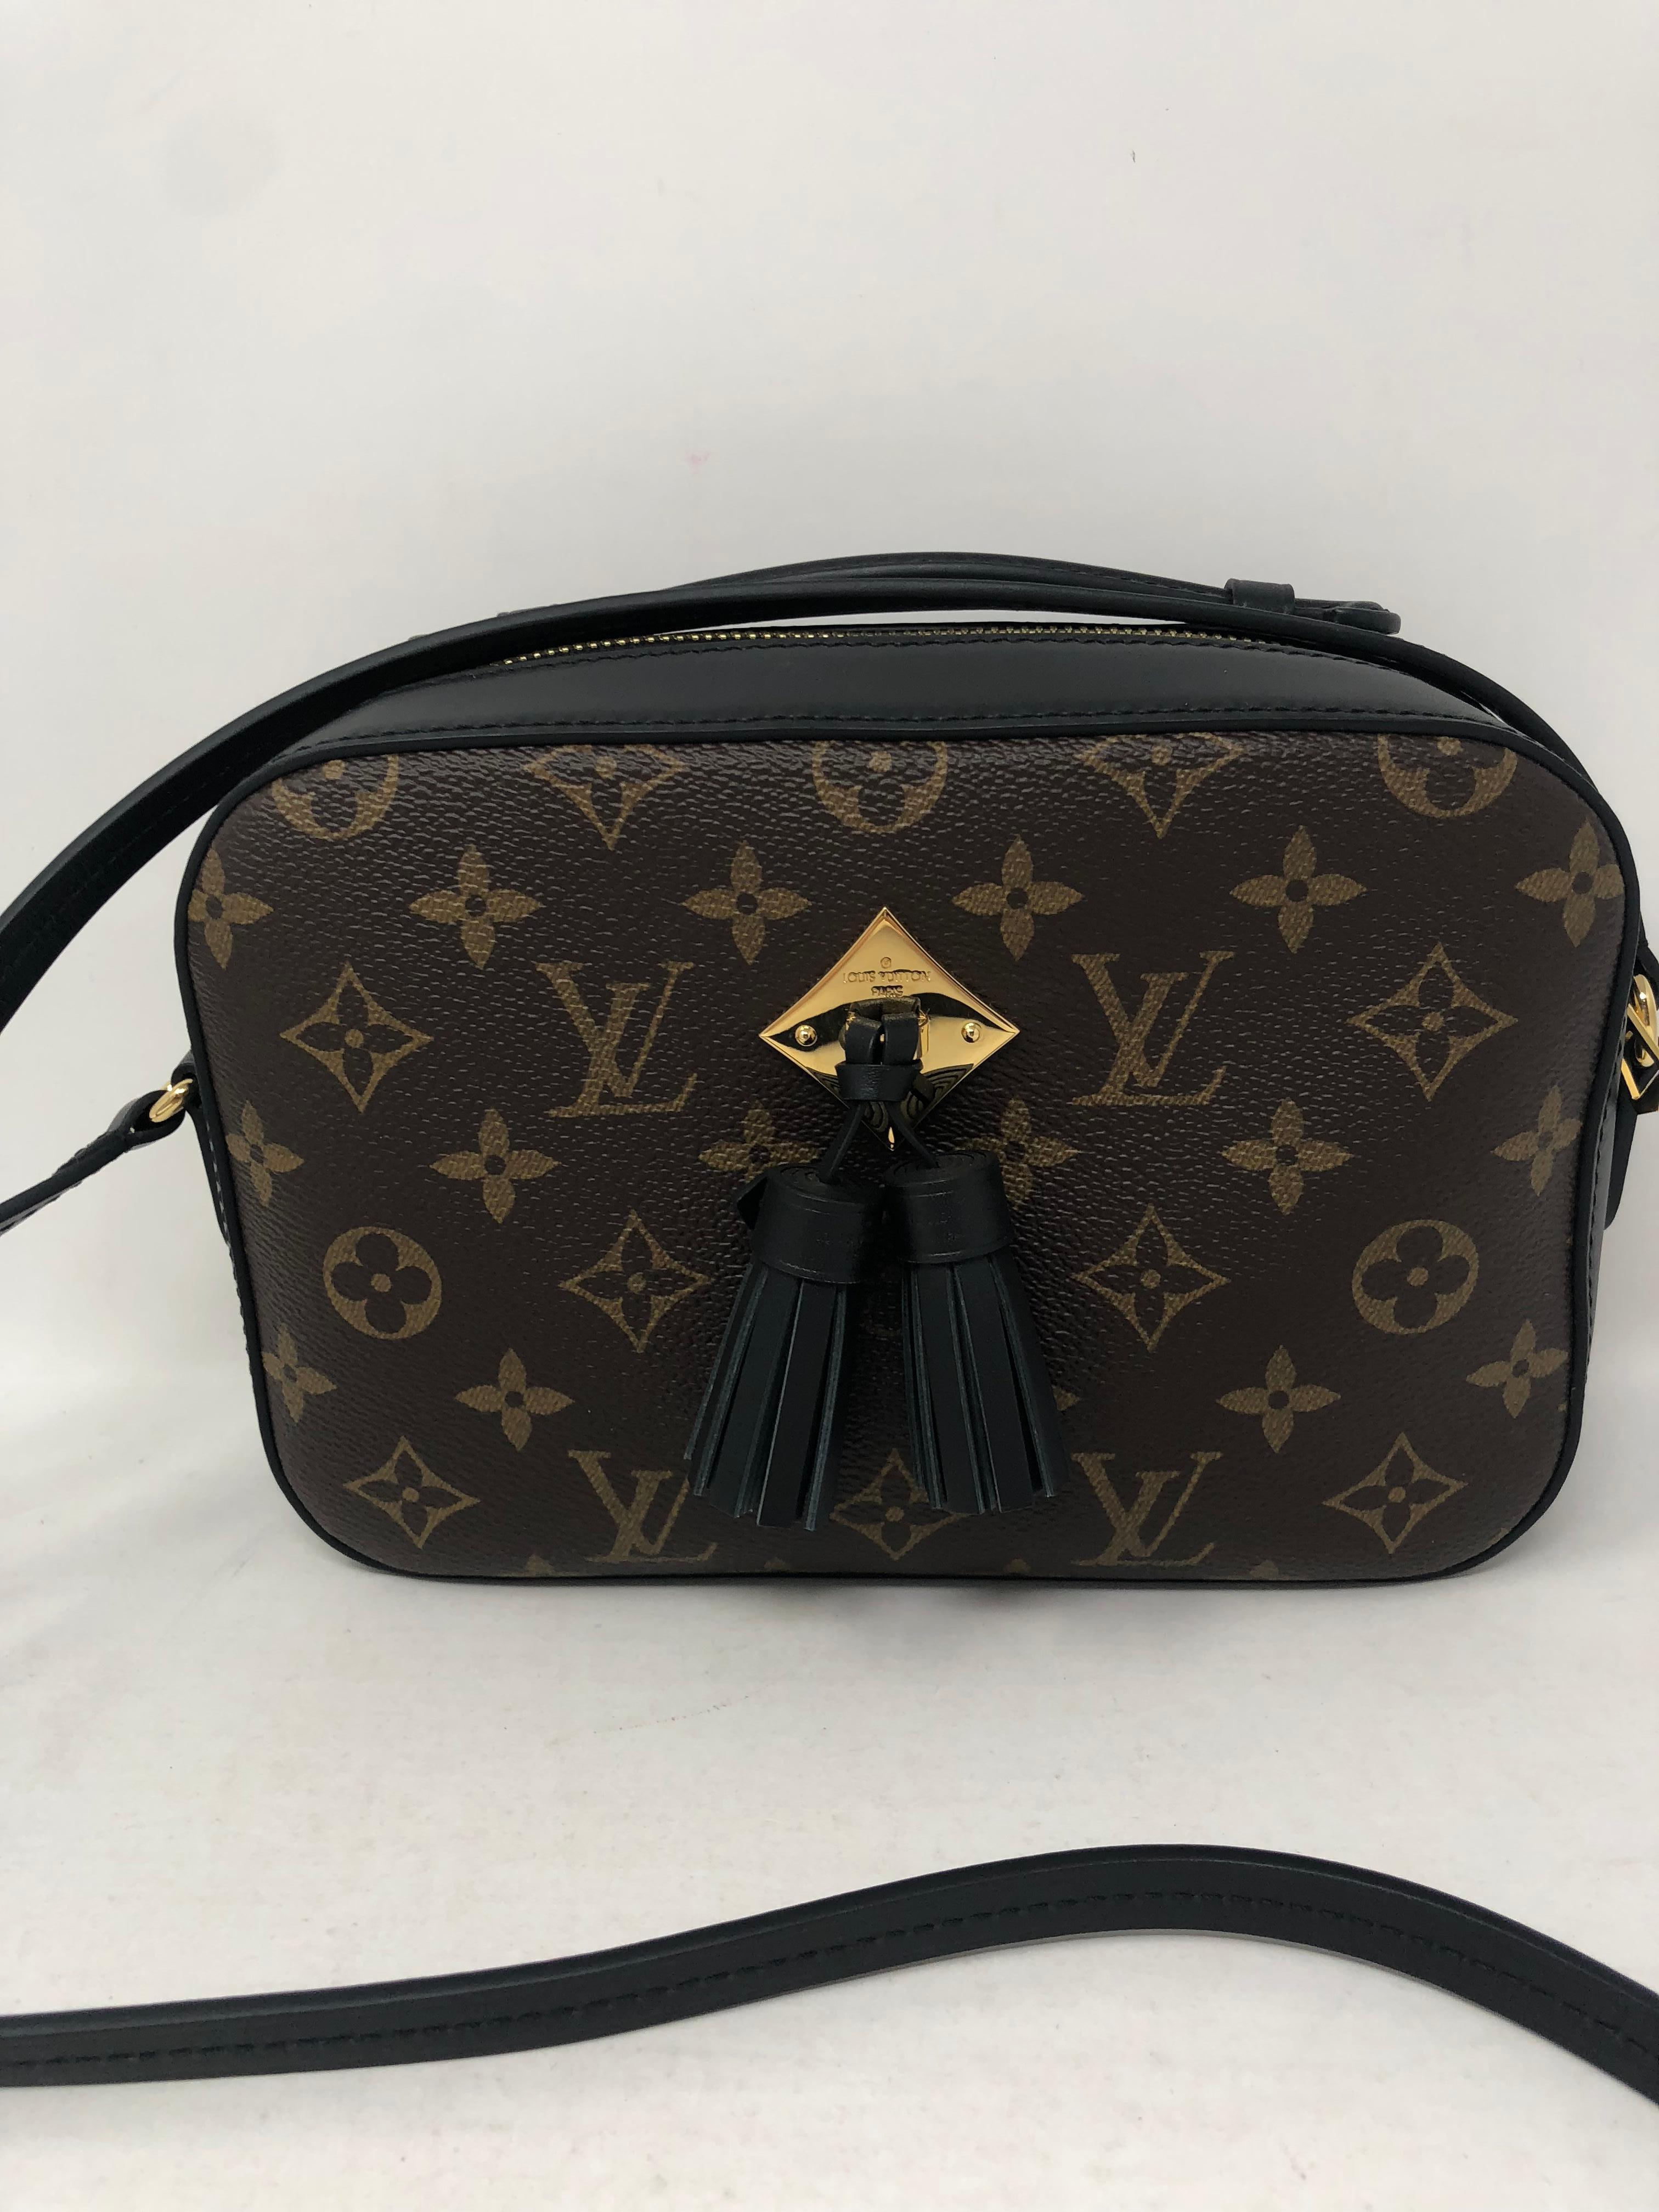 Louis Vuitton Saintonge with black leather trim. Tassel detail in front makes this a very unique bag. Gorgeous style and new condition. Sold out and not available at LV. Don't miss out on this one. Guaranteed authentic. 